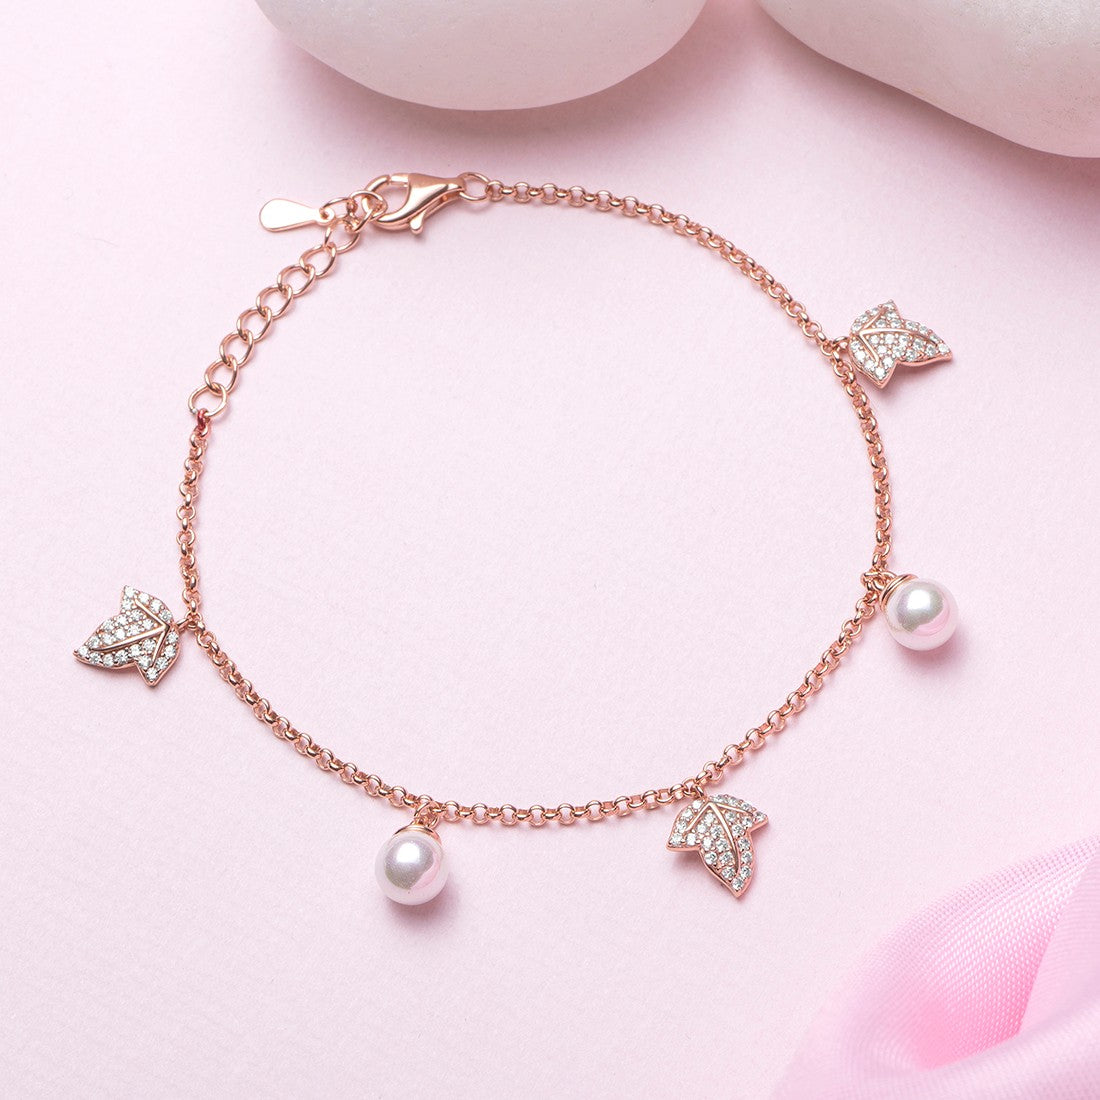 Twinkling Leaves and Cute Pearls Charm 925 Silver Bracelet